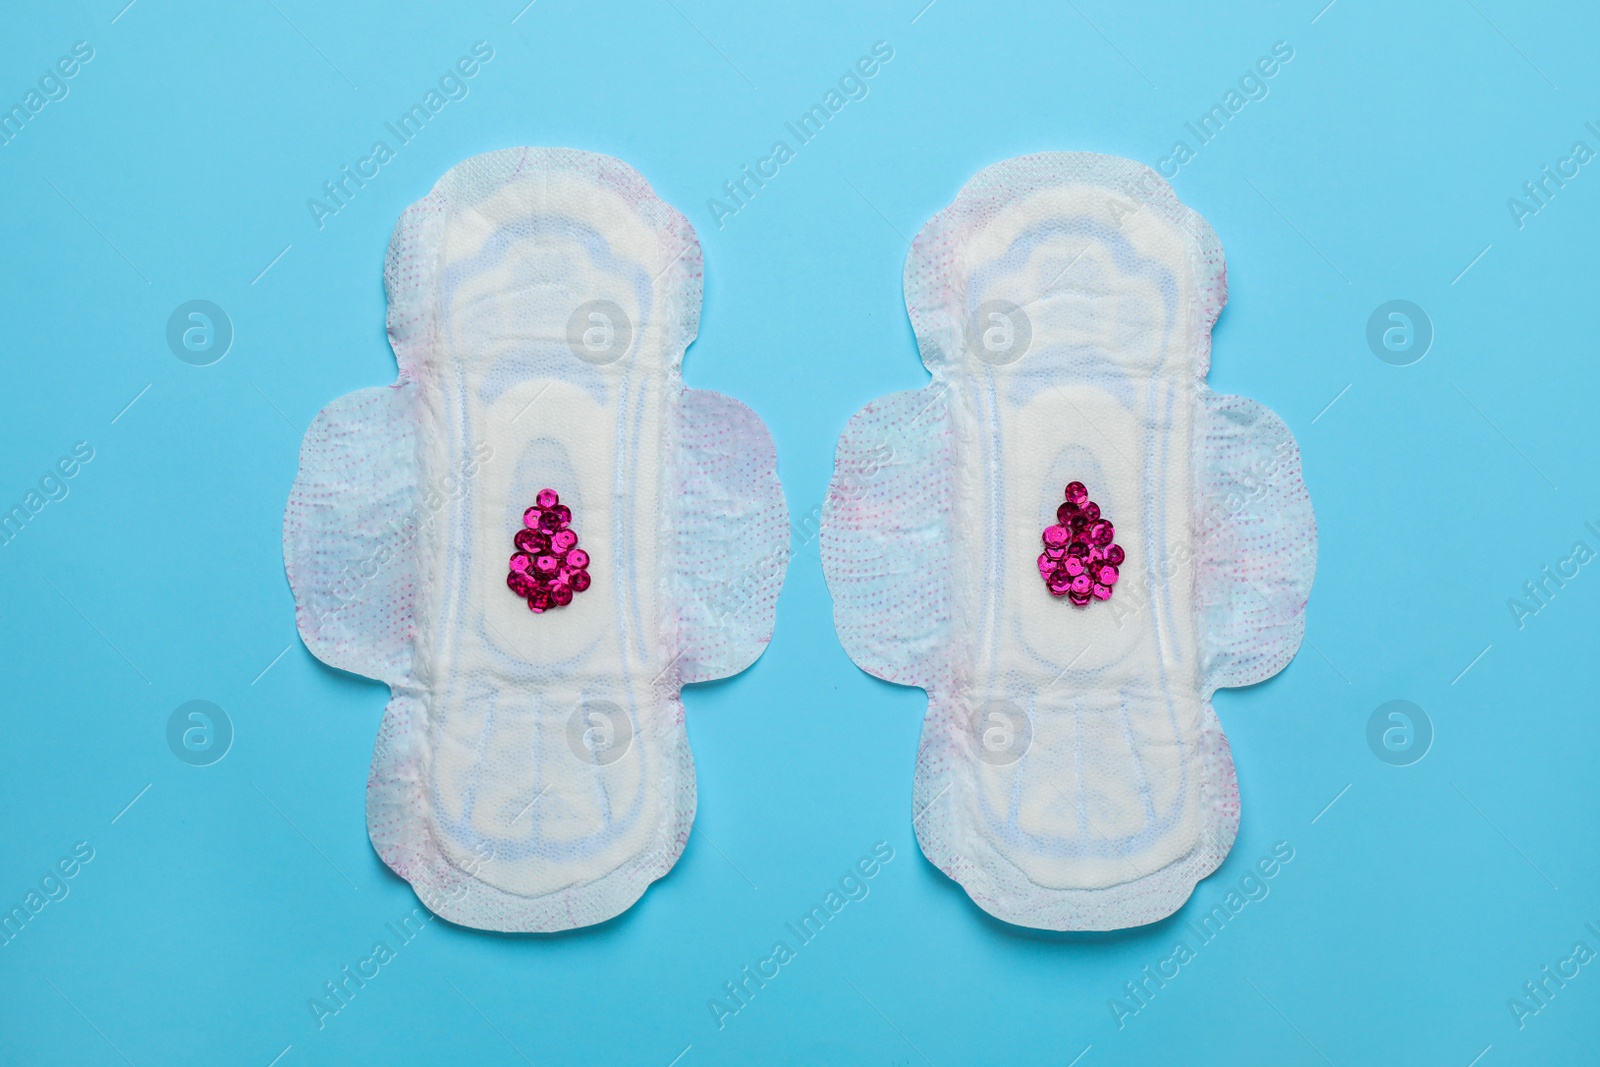 Photo of Menstrual pads with drops made of pink sequins on light blue background, flat lay